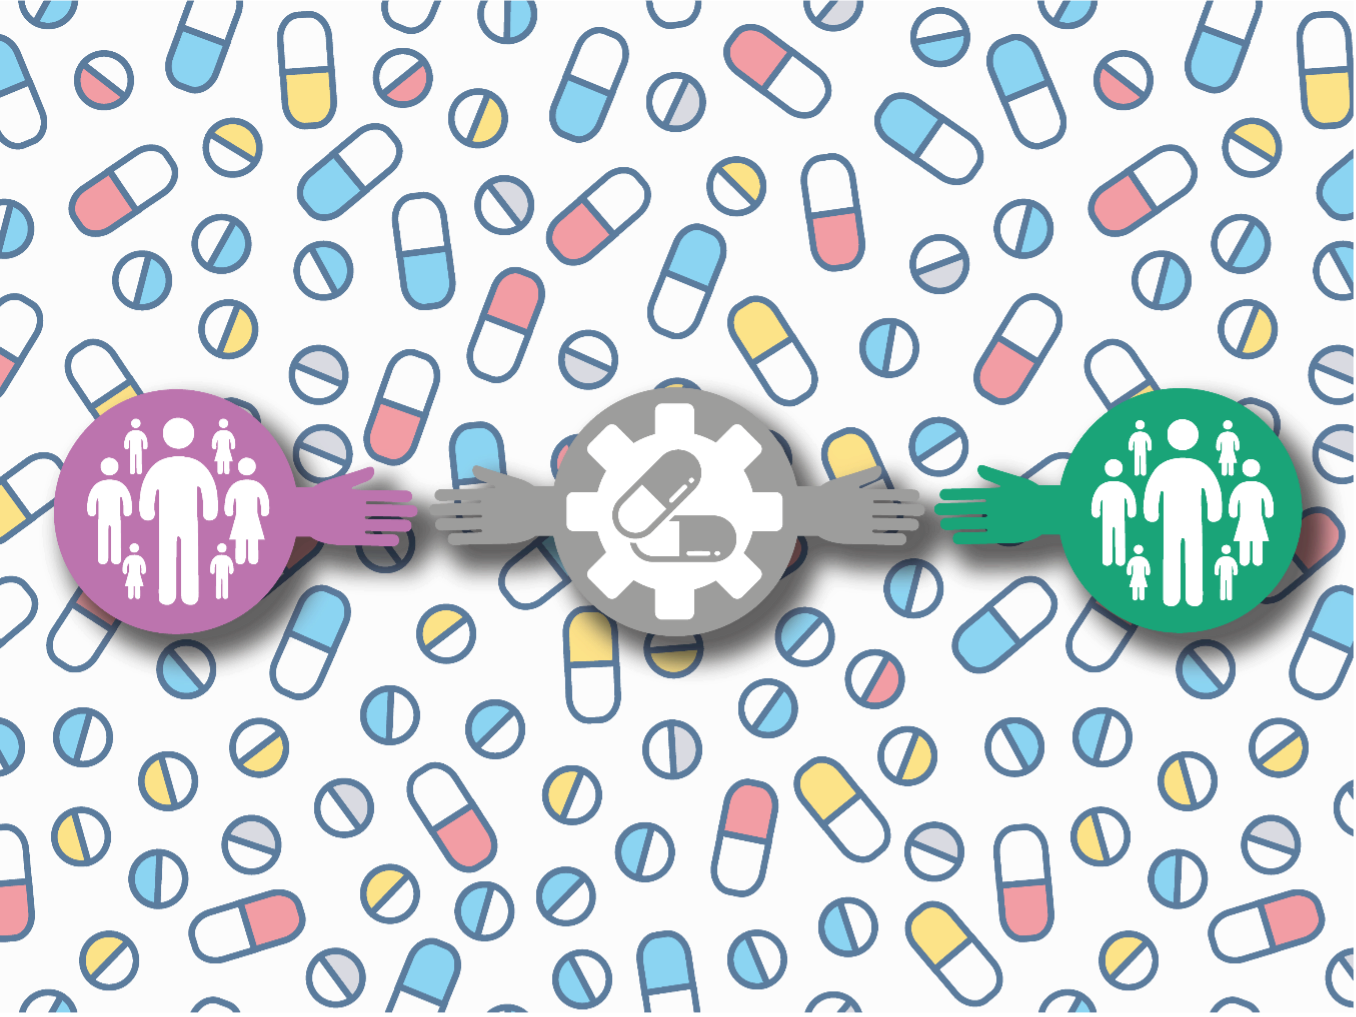 What do Pharma companies find valuable in relationships with patient groups?